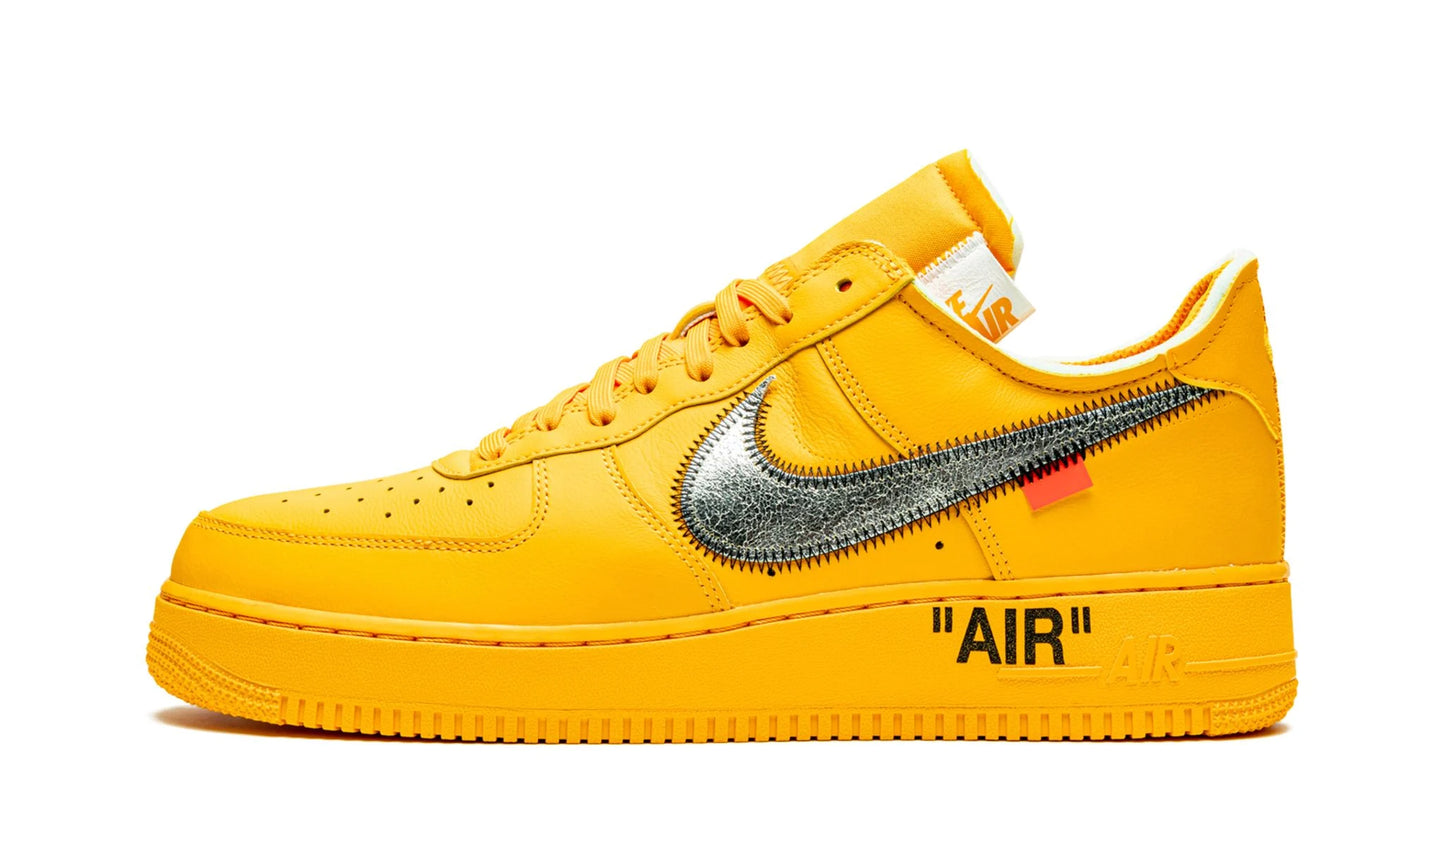 NIKE X OFF-WHITE AIR FORCE 1 LOW 